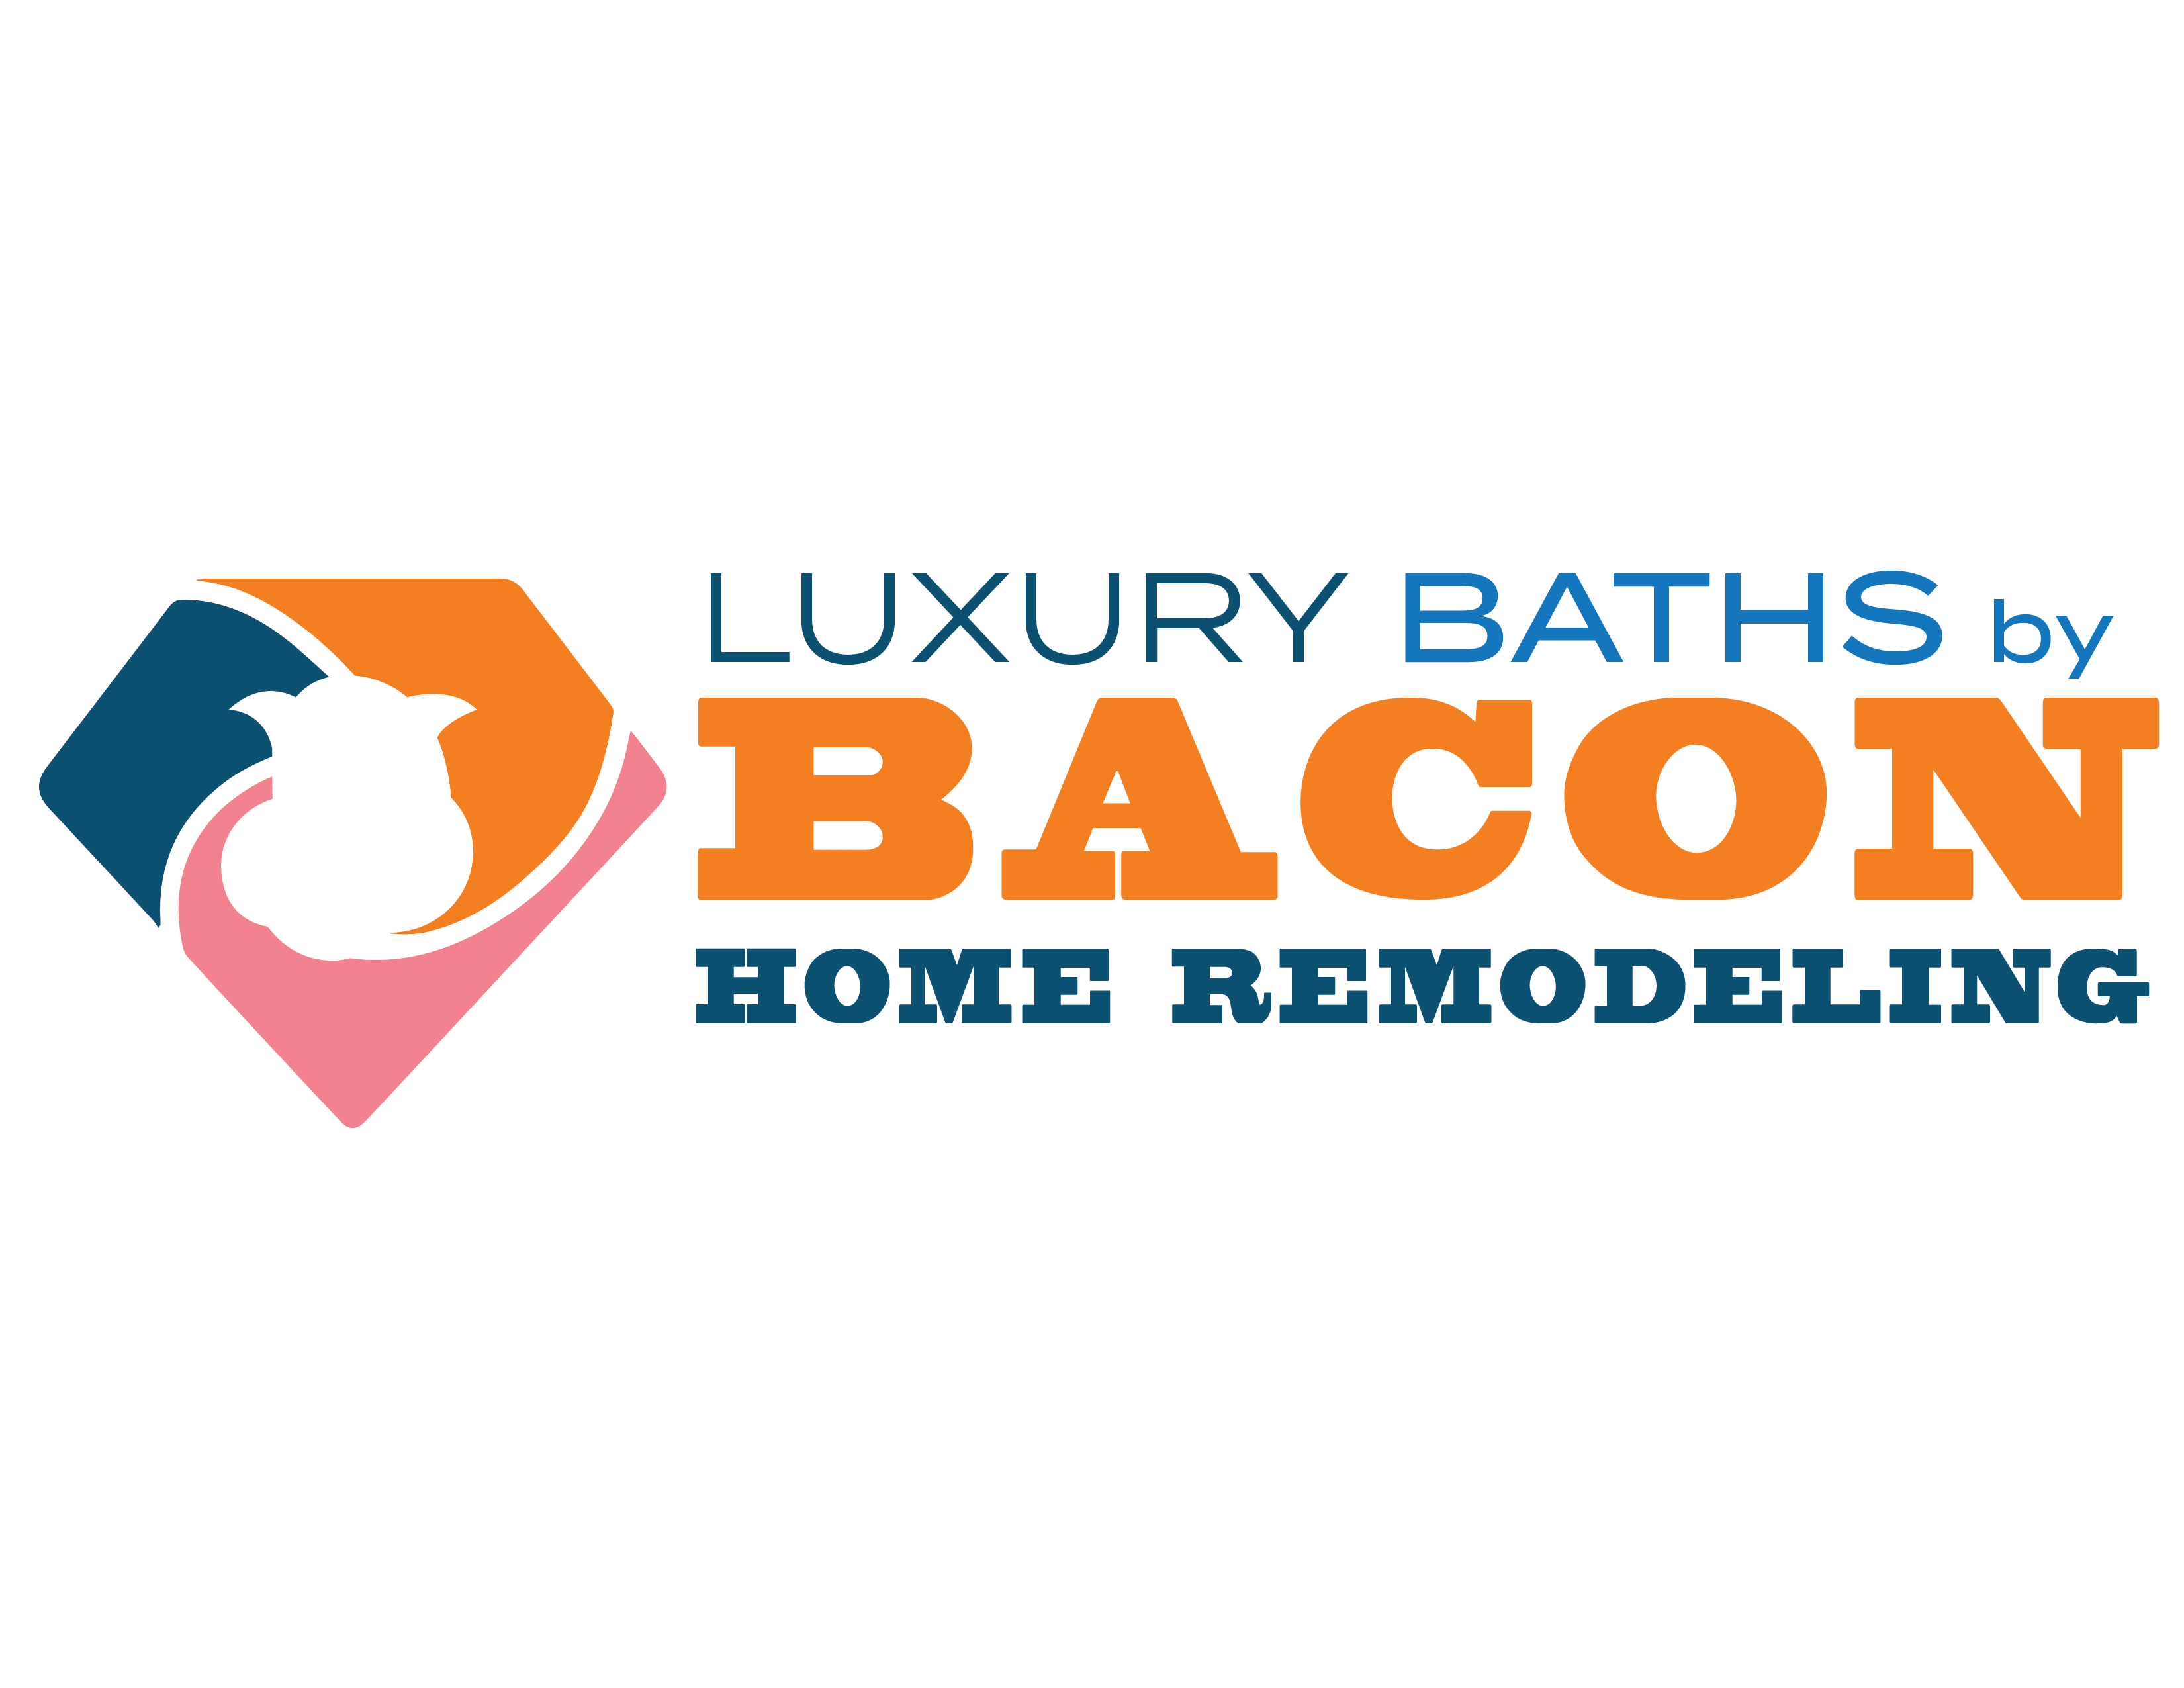 Luxury Baths by Bacon Home Remodeling